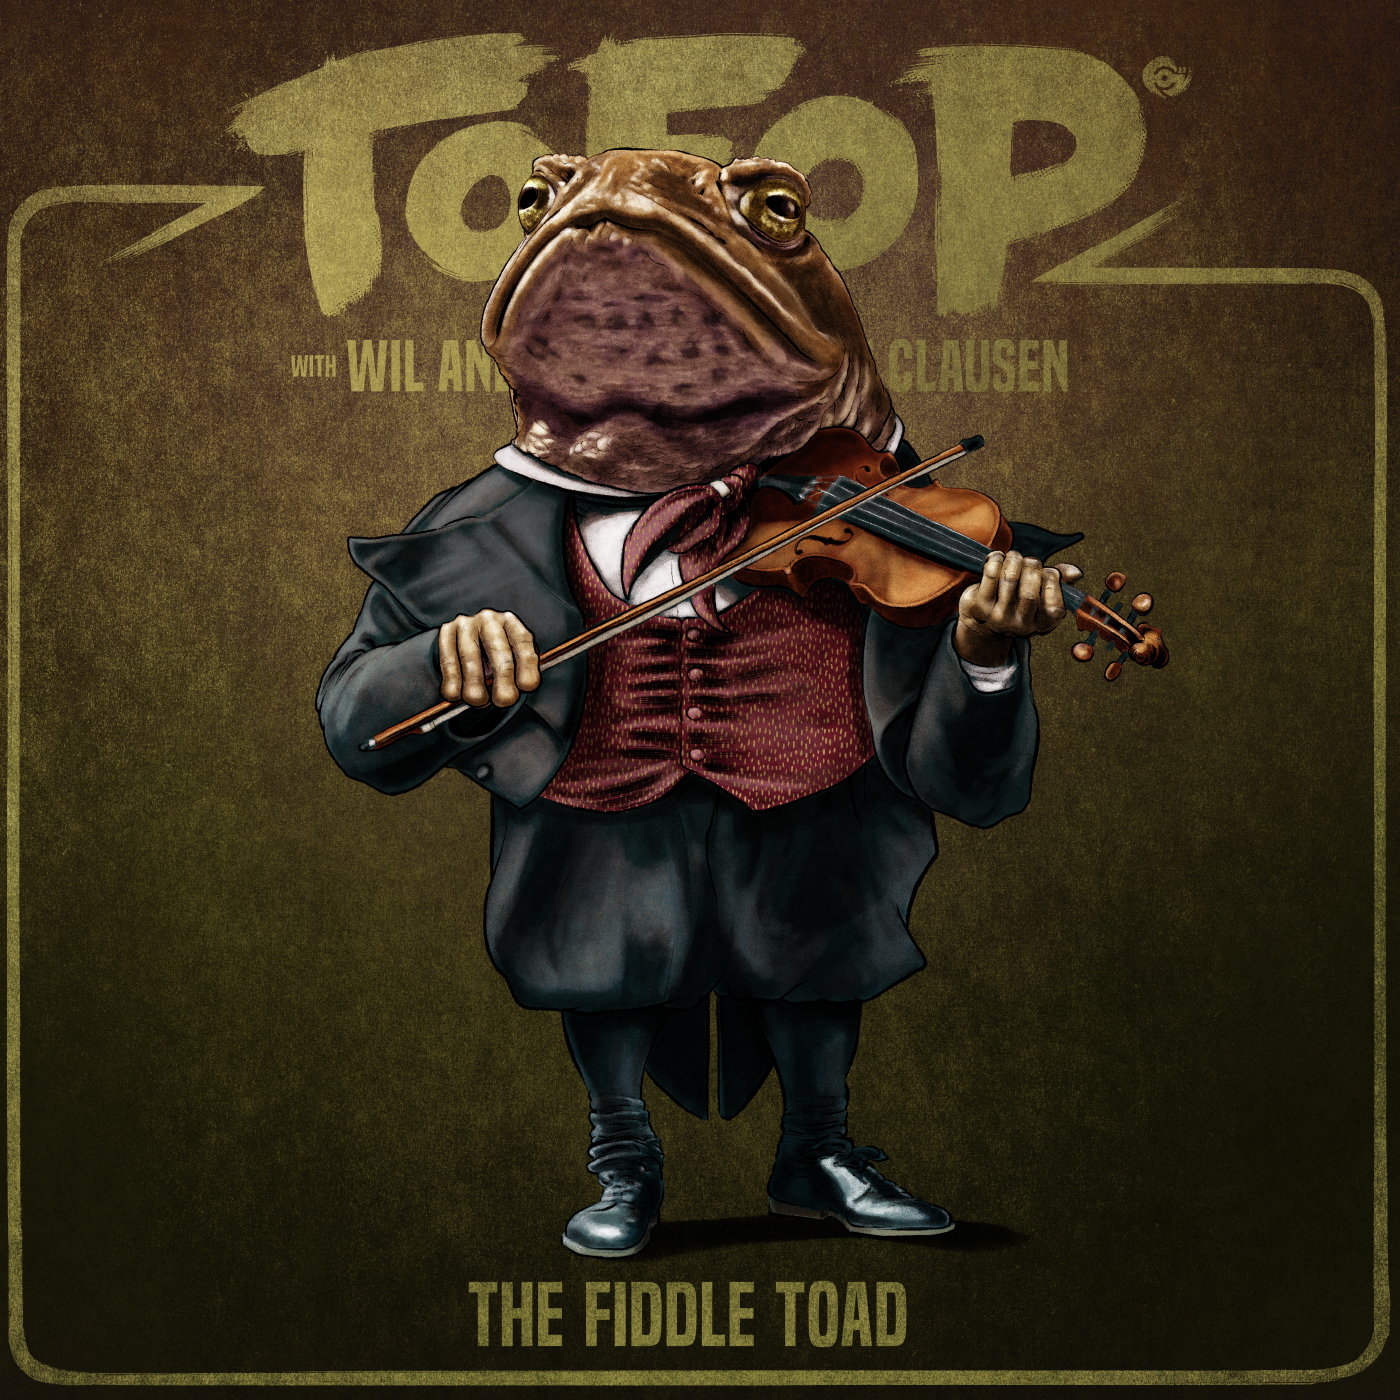 TOFOP: The Fiddle Toad